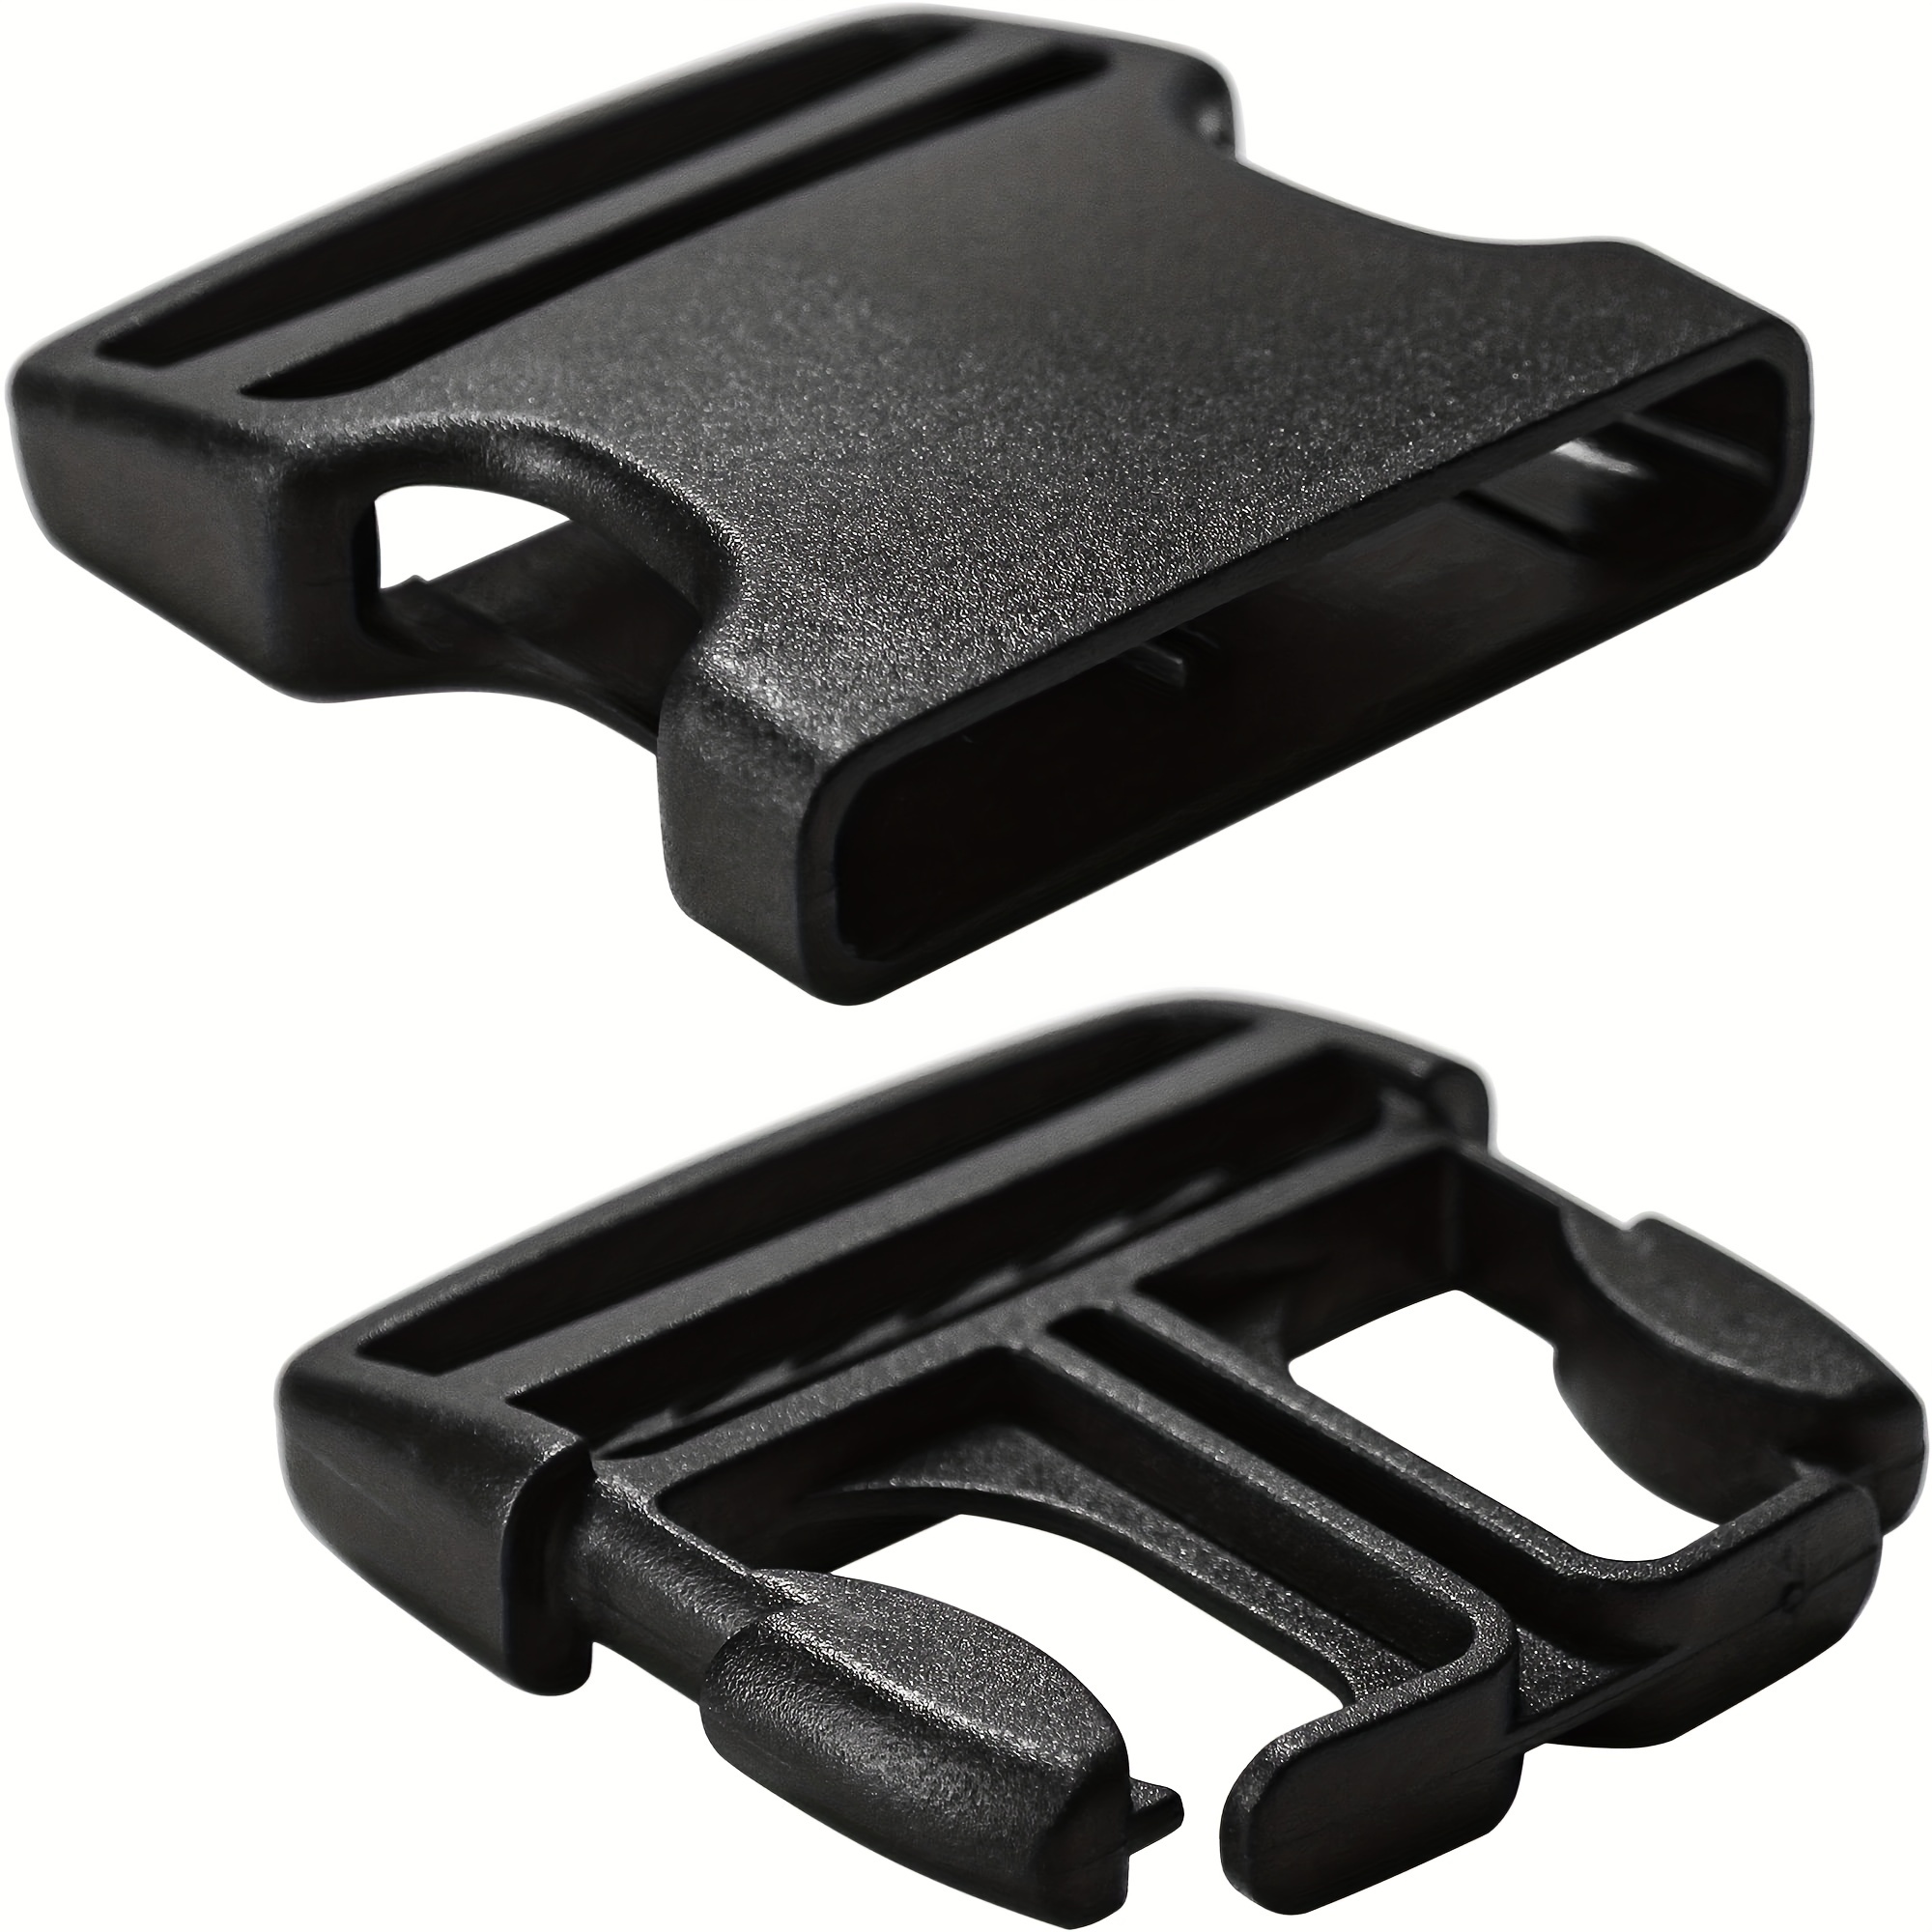 2 Inch Thick Military Grade Black Plastic Buckles - Quick Side Release  Clips No Sewing - Adjustable Snaps Heavy Duty Replacement for Nylon Bag  Straps